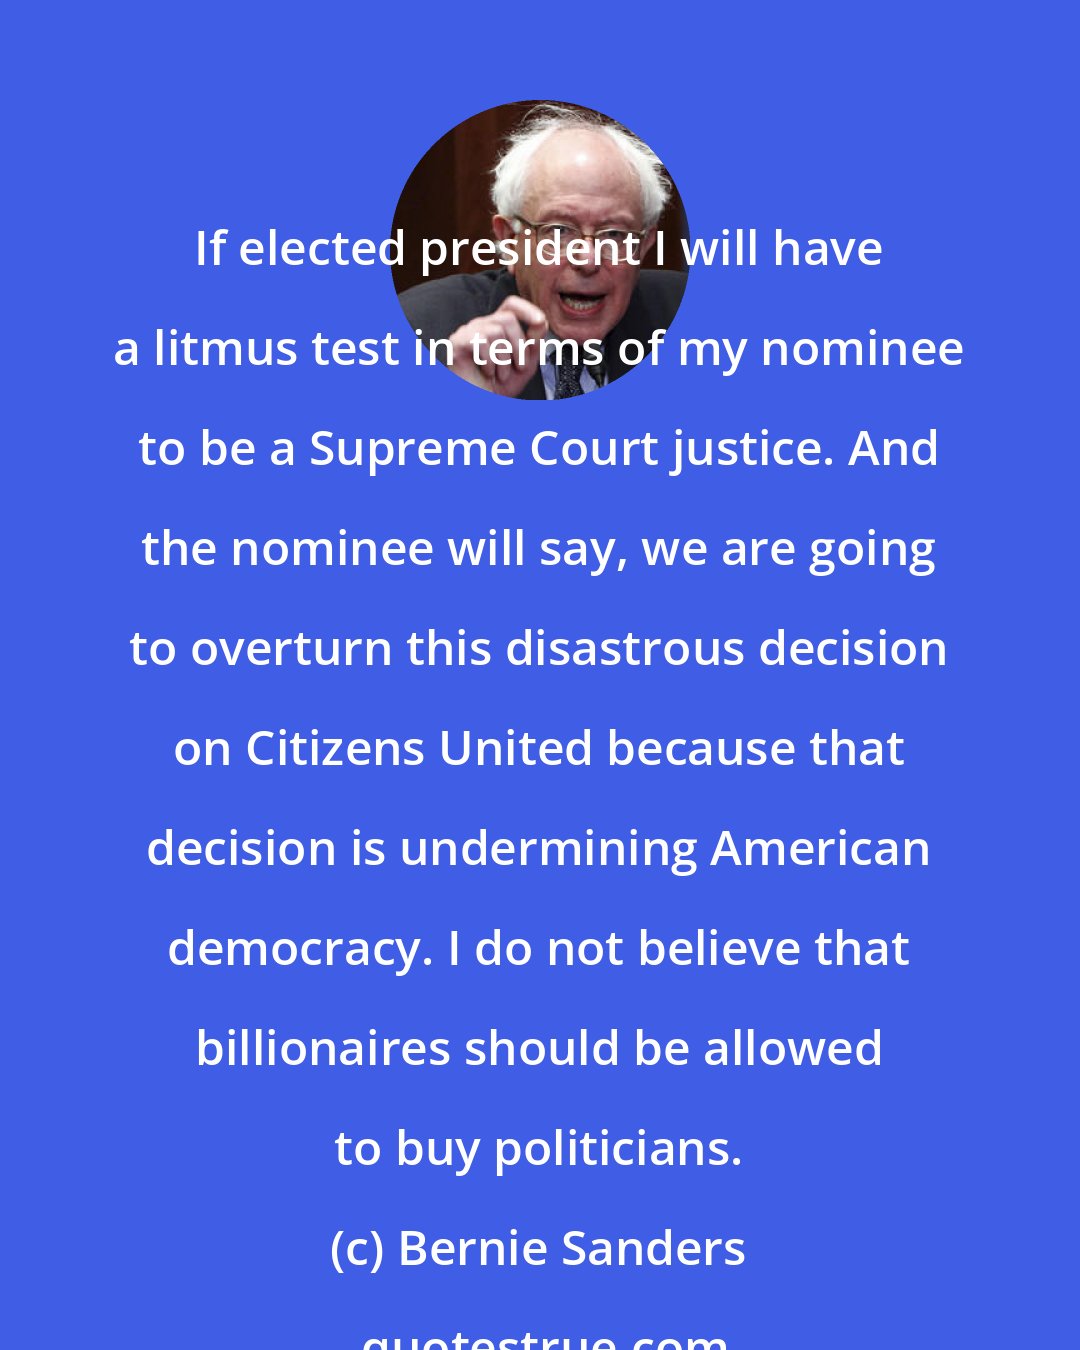 Bernie Sanders: If elected president I will have a litmus test in terms of my nominee to be a Supreme Court justice. And the nominee will say, we are going to overturn this disastrous decision on Citizens United because that decision is undermining American democracy. I do not believe that billionaires should be allowed to buy politicians.